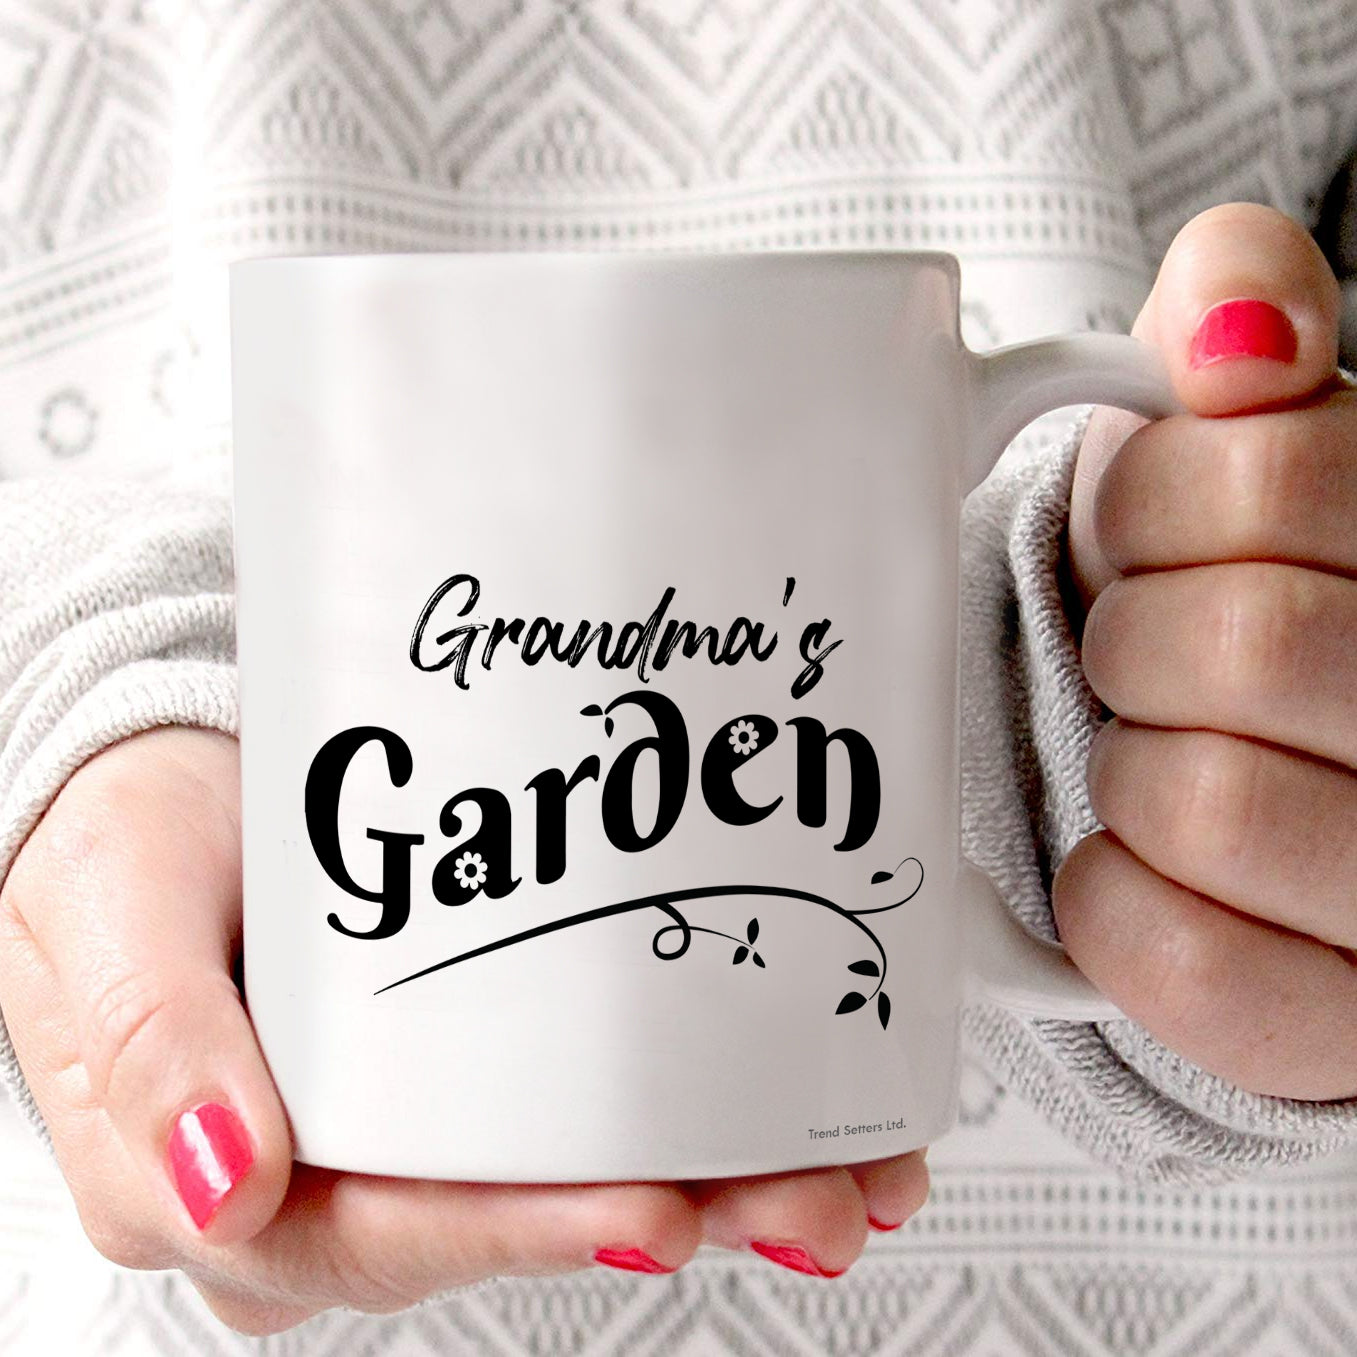 Family Collection (Birth Month Flower Garden - Personalized) White Ceramic Mug